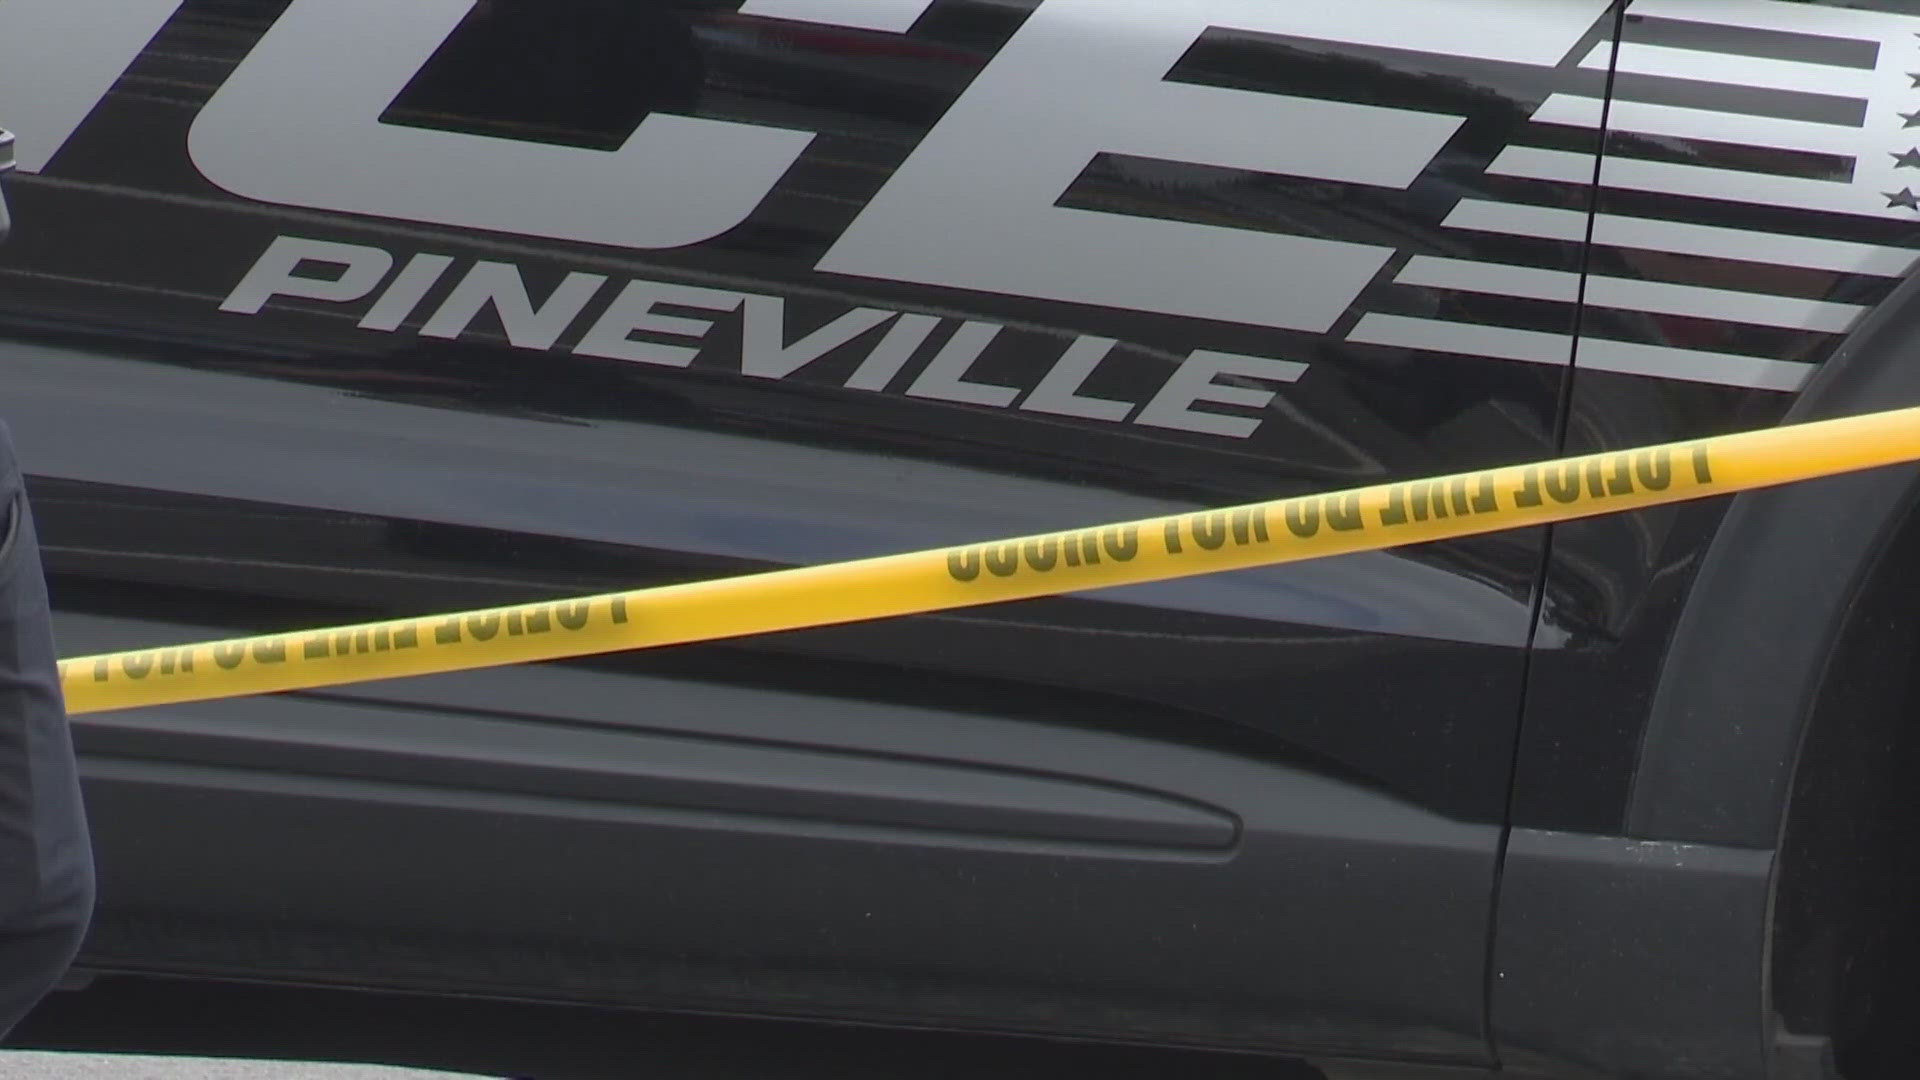 A shoplifting suspect is dead after a shooting unfolded from a chase in Pineville and Charlotte Tuesday afternoon.